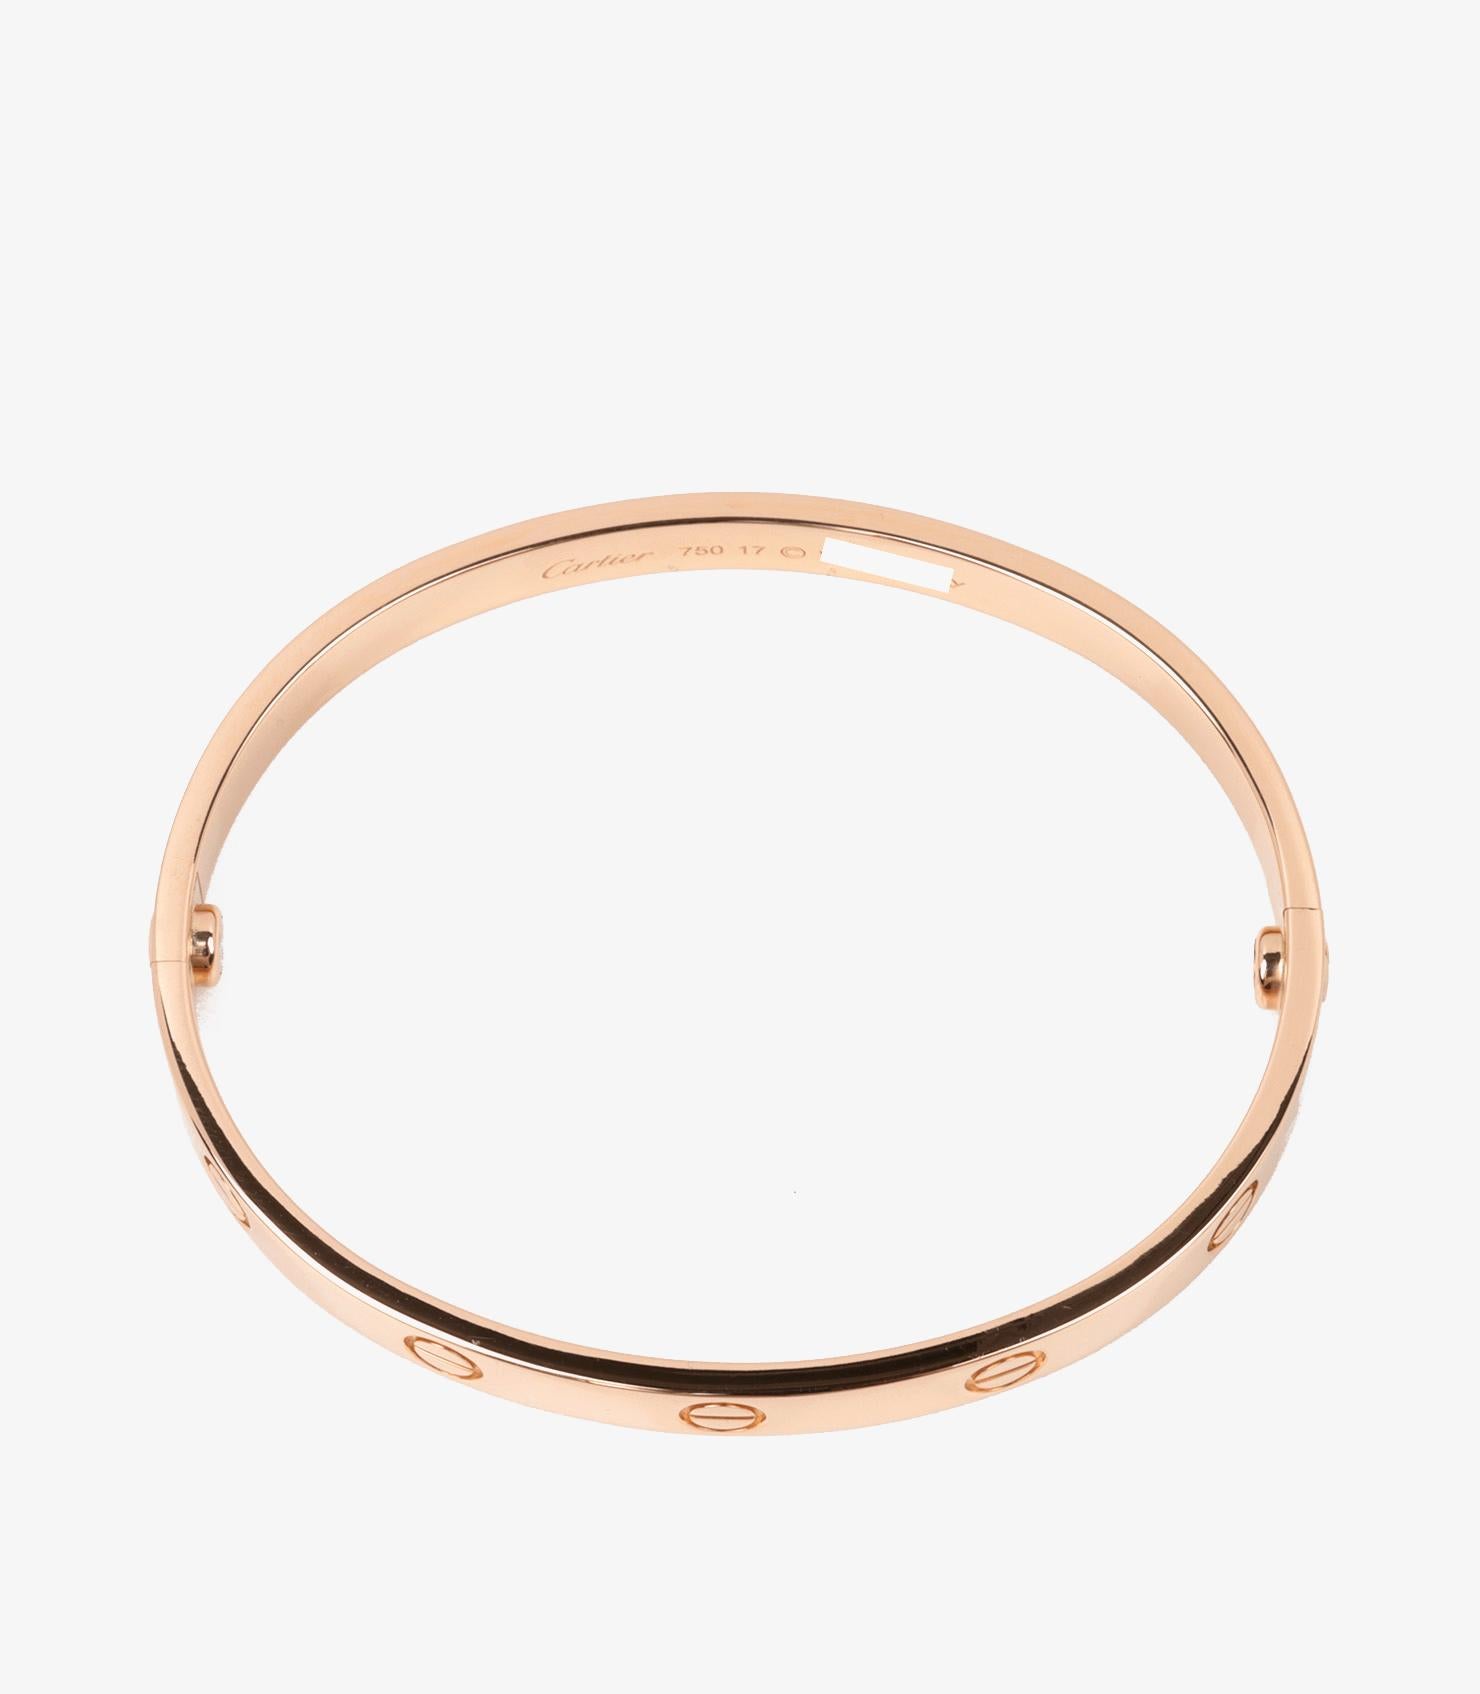 Cartier 18ct Rose Gold Love Bangle For Sale 3